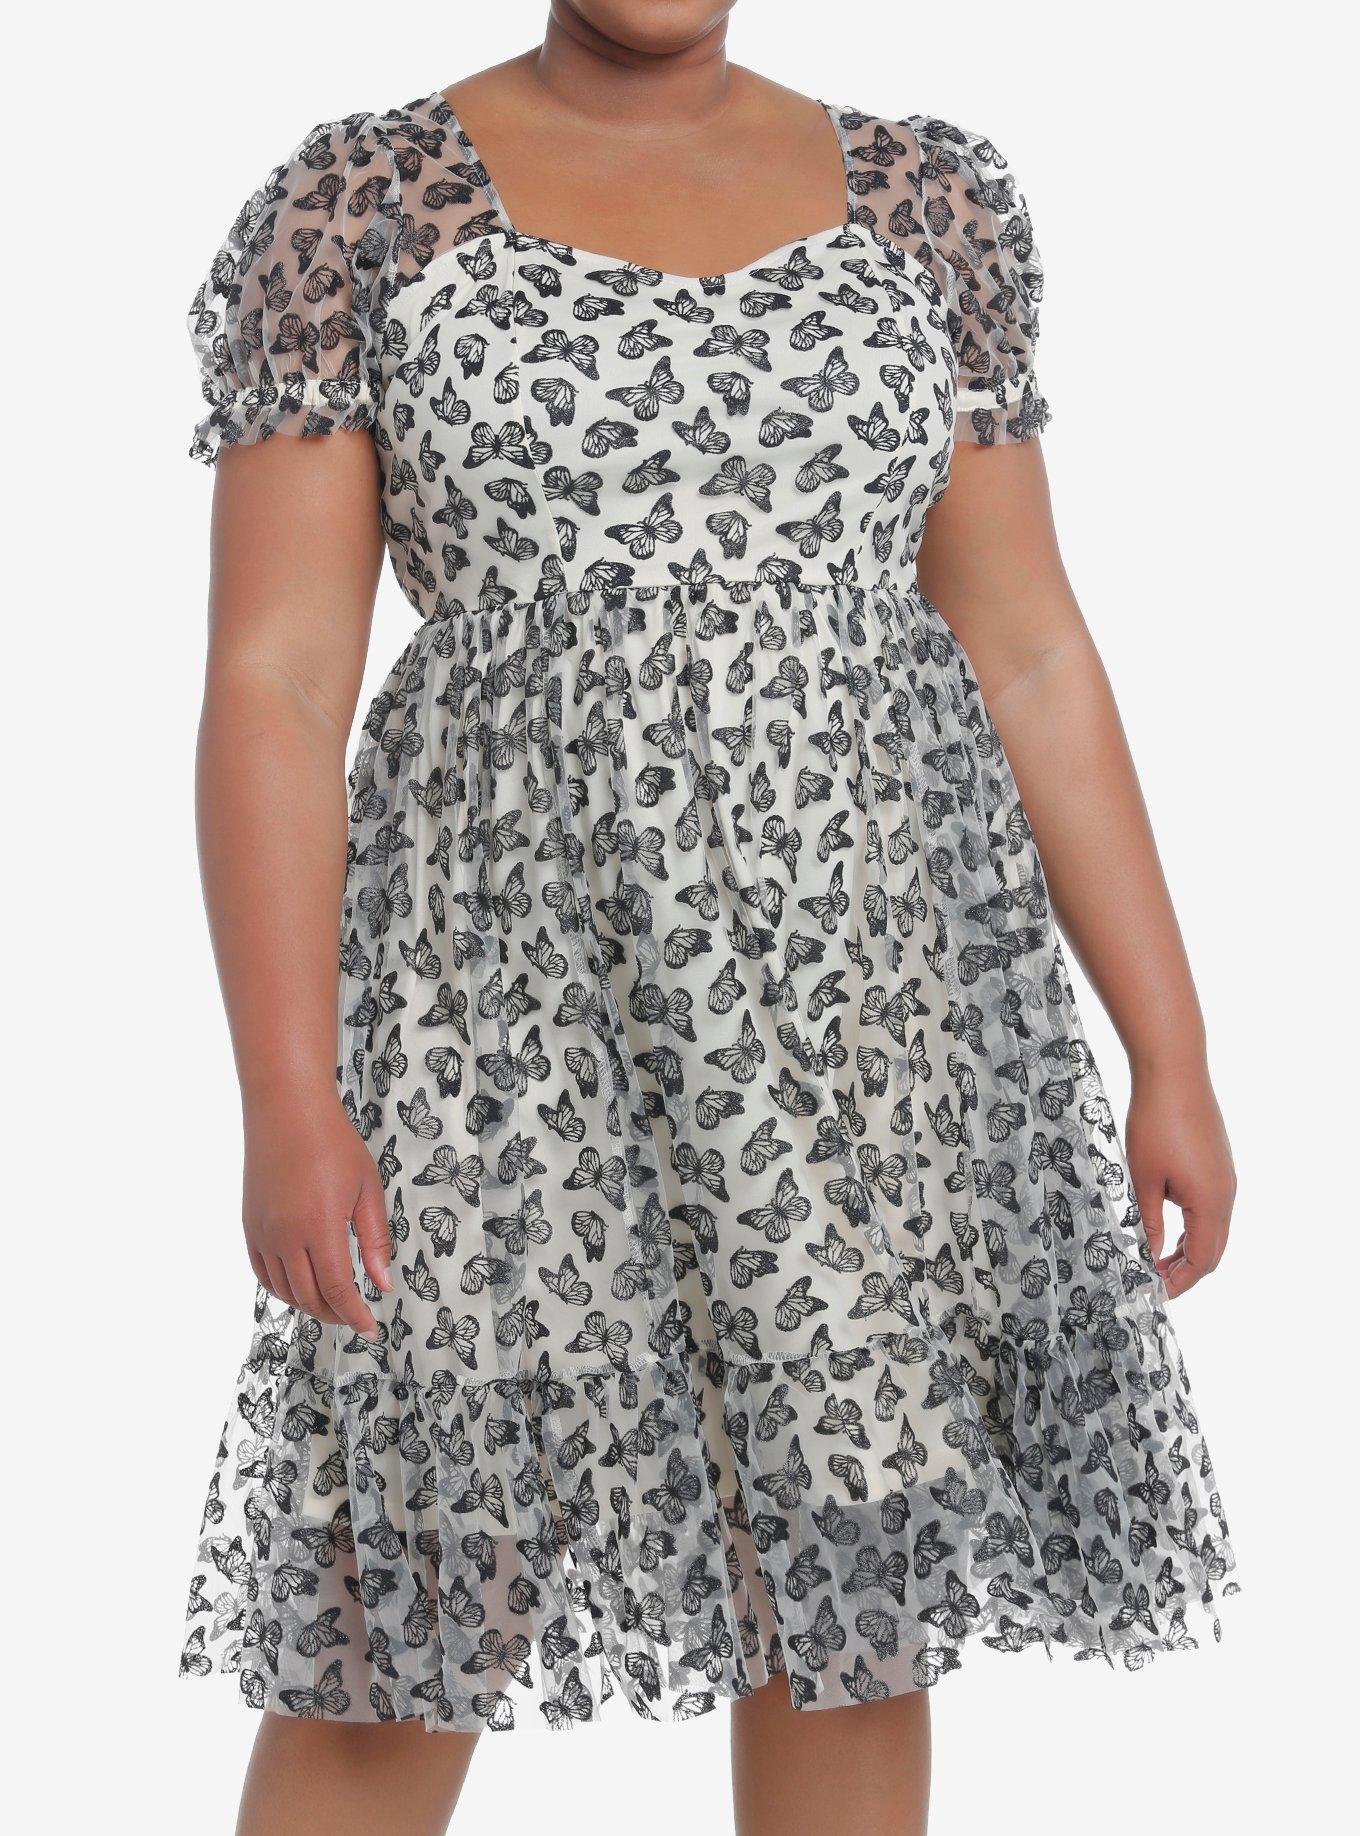 Thorn & Fable Ivory & Black Butterfly Glitter Mesh Dress Plus Size, IVORY, hi-res